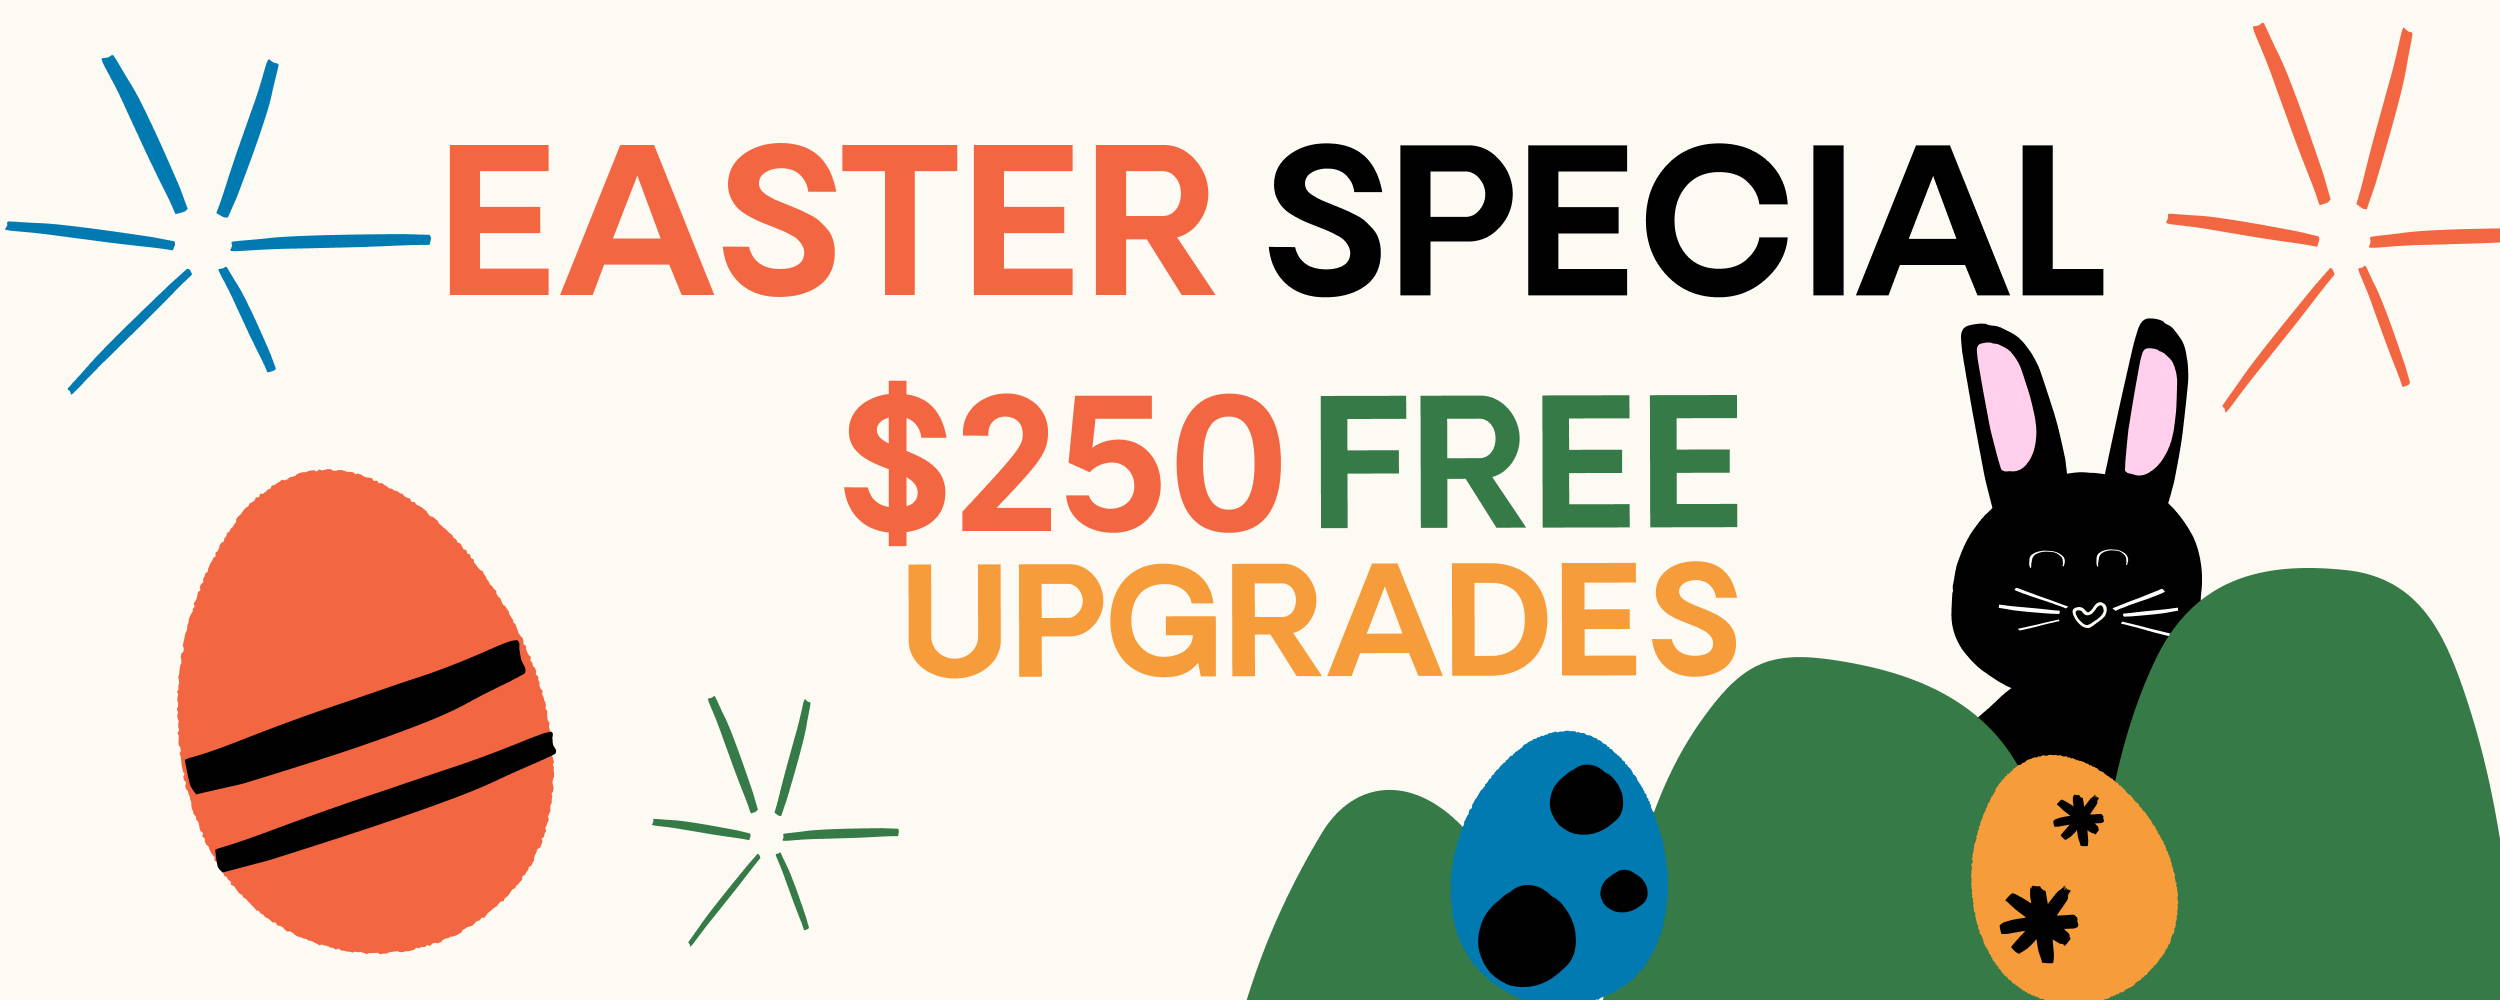 Easter Special Campaign - Free Upgrades